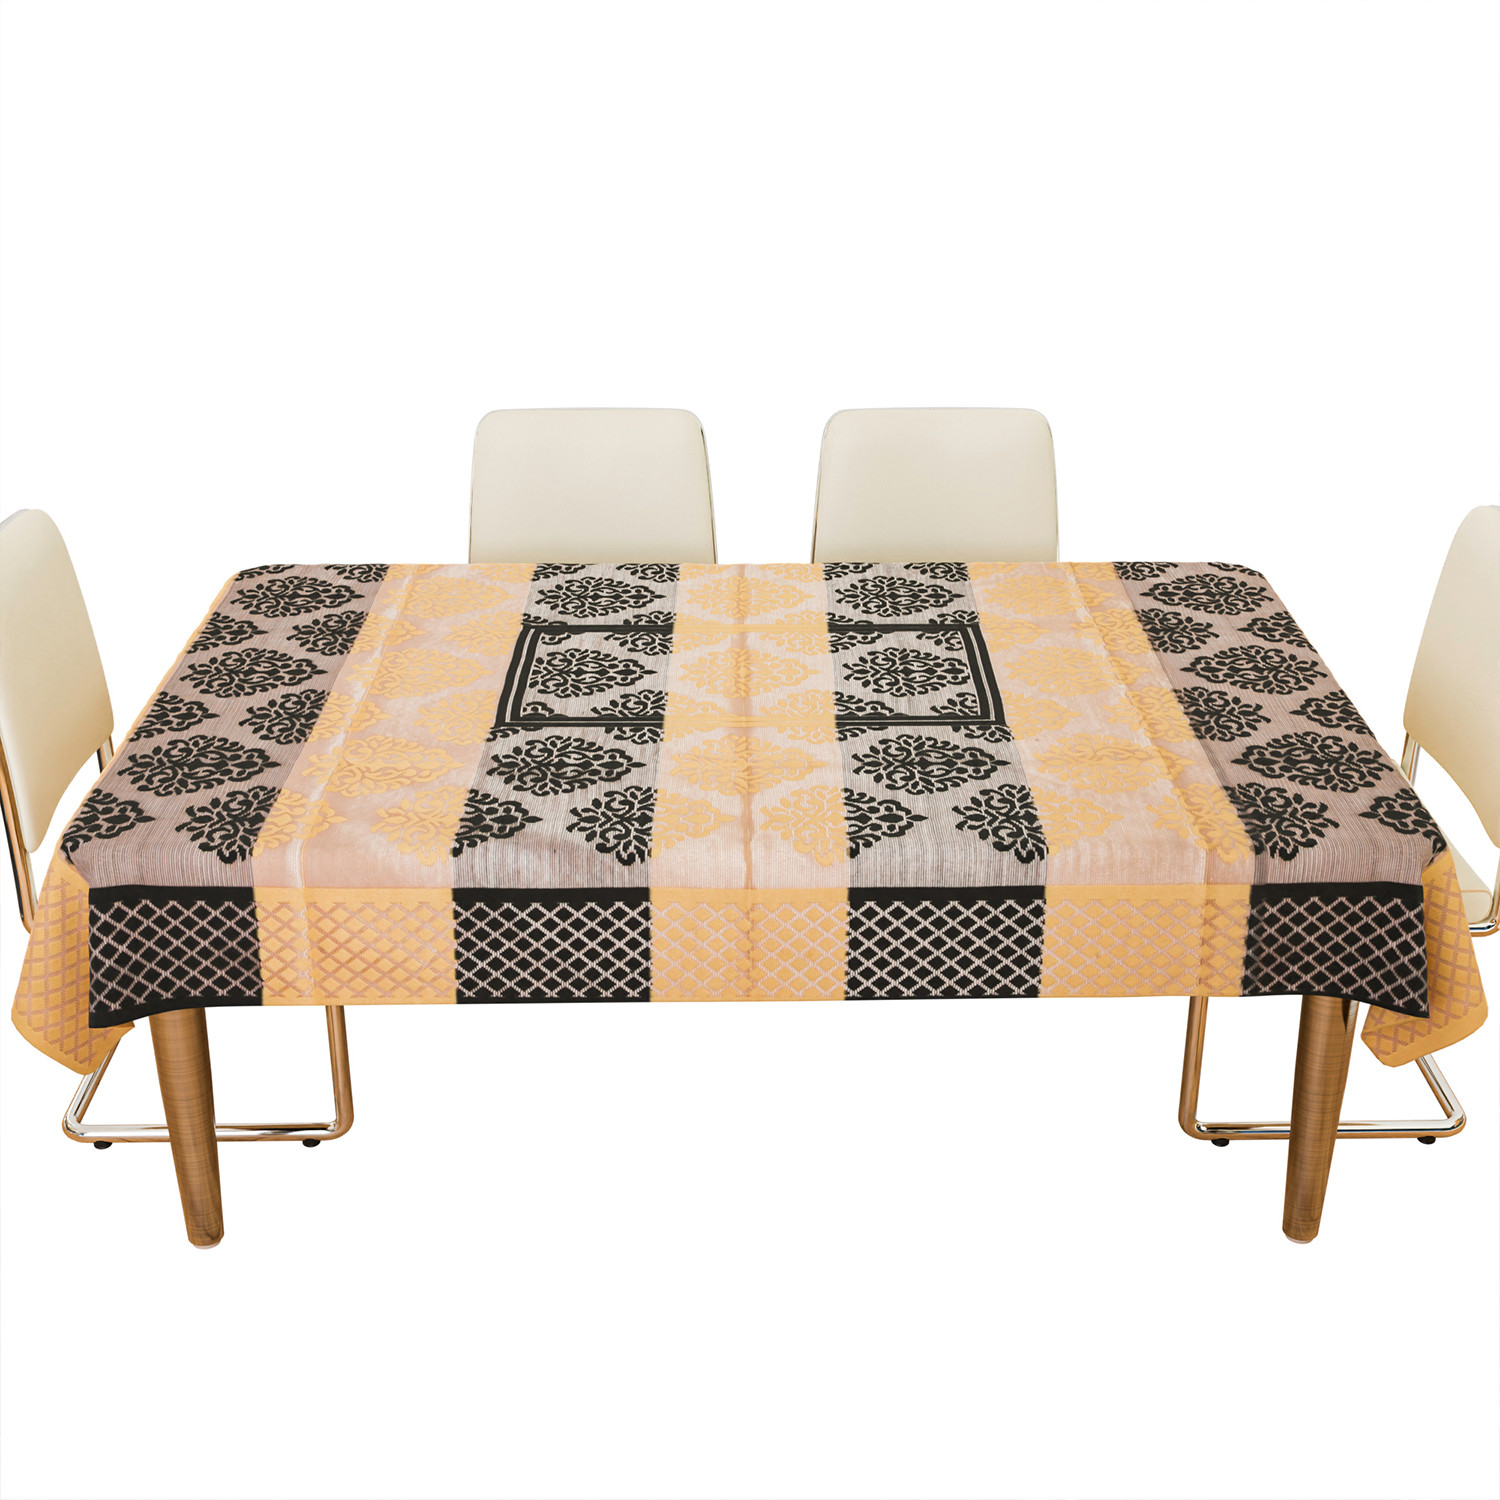 Kuber Industries Dining Table Cover | Kitchen Dining Tablecloth | 6 Seater Dining Table Cover | Dining Table Cover for Hall Décor | Brown Star Patta Net Tablecloth | DTC | 60x90 | Orange